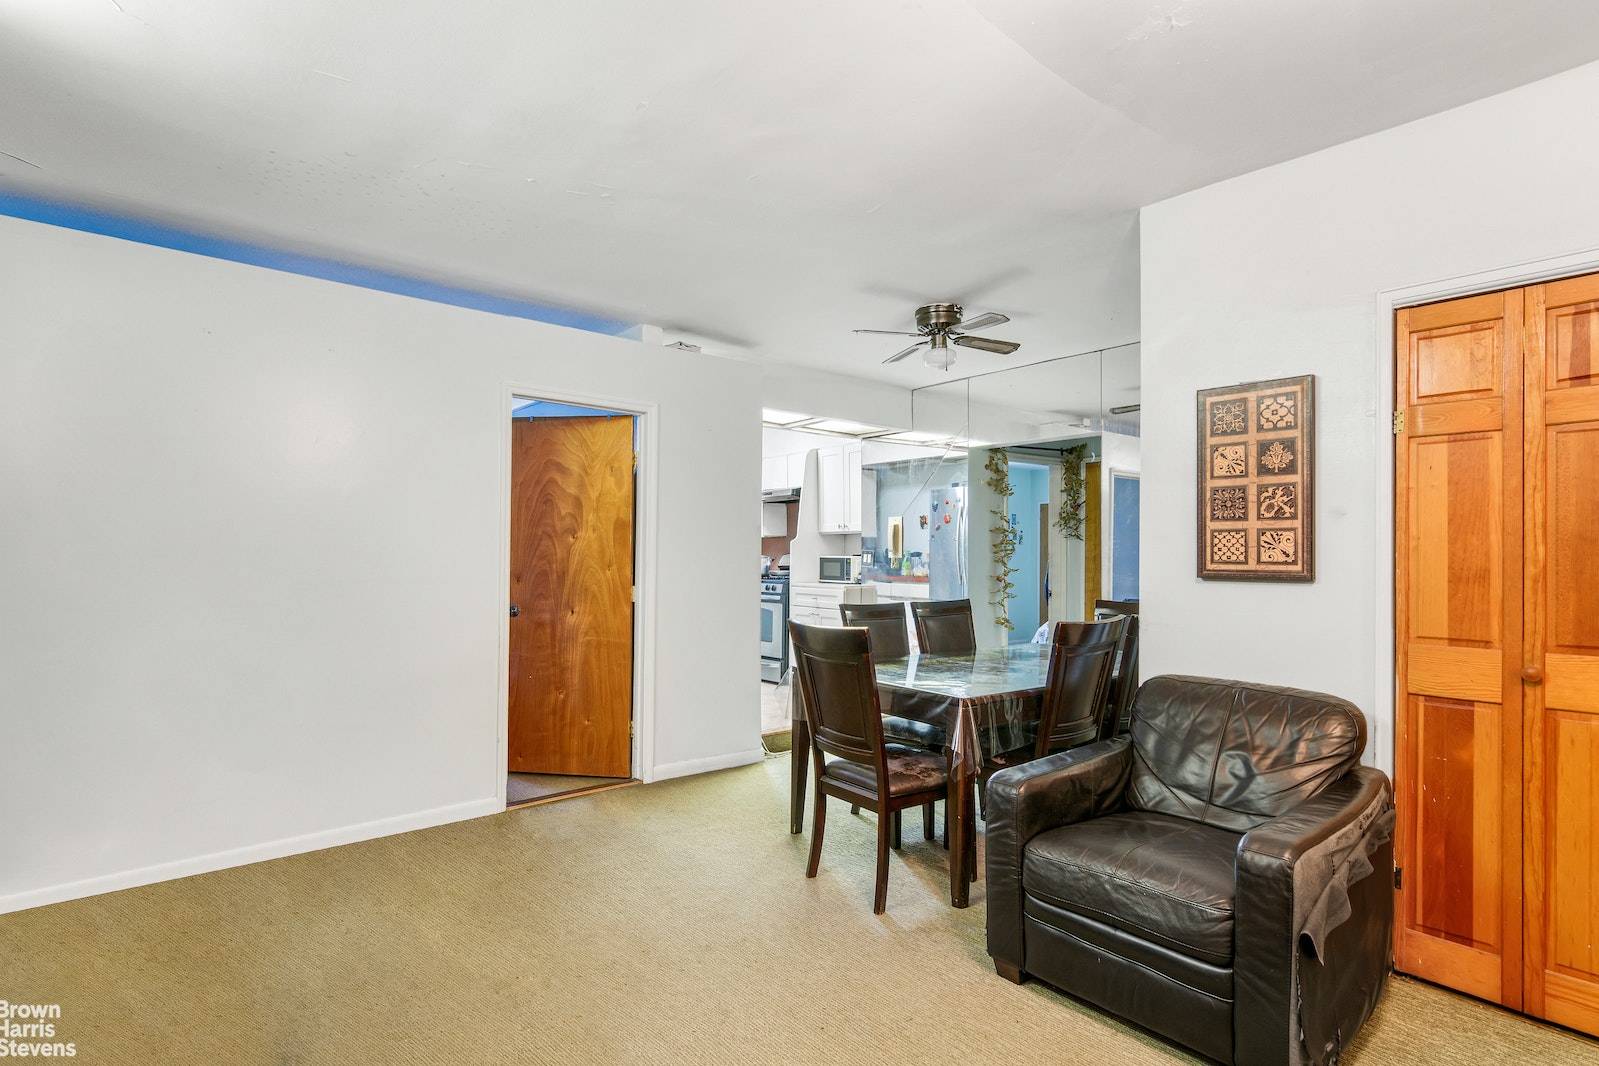 Welcome to 390 Rugby Road, a beautiful and sunny 1 bedroom COOP located in the prime neighborhood of Ditmas Park.